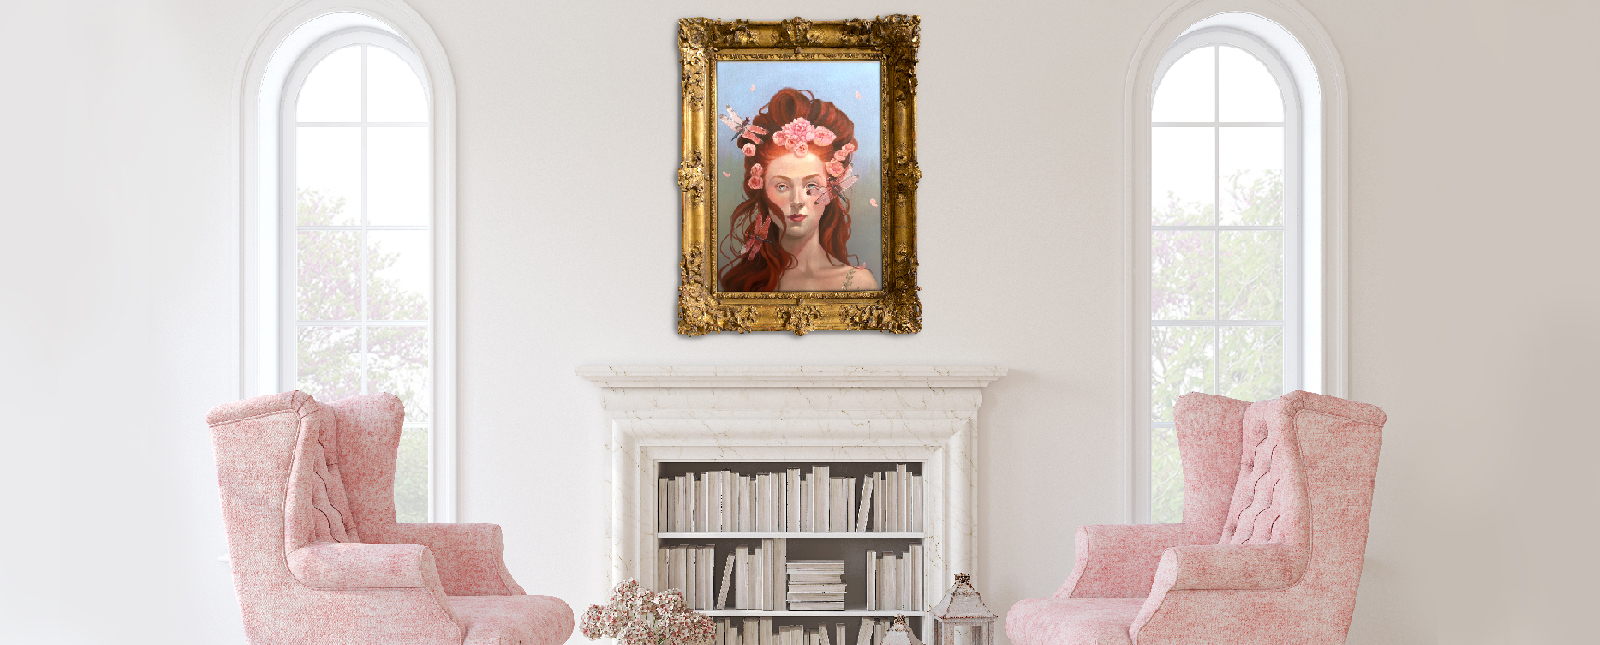 A bright living room featuring two pink armchairs flanking a white fireplace with a large ornate golden frame displaying a whimsical painting of a woman adorned with a flower crown, placed between arched